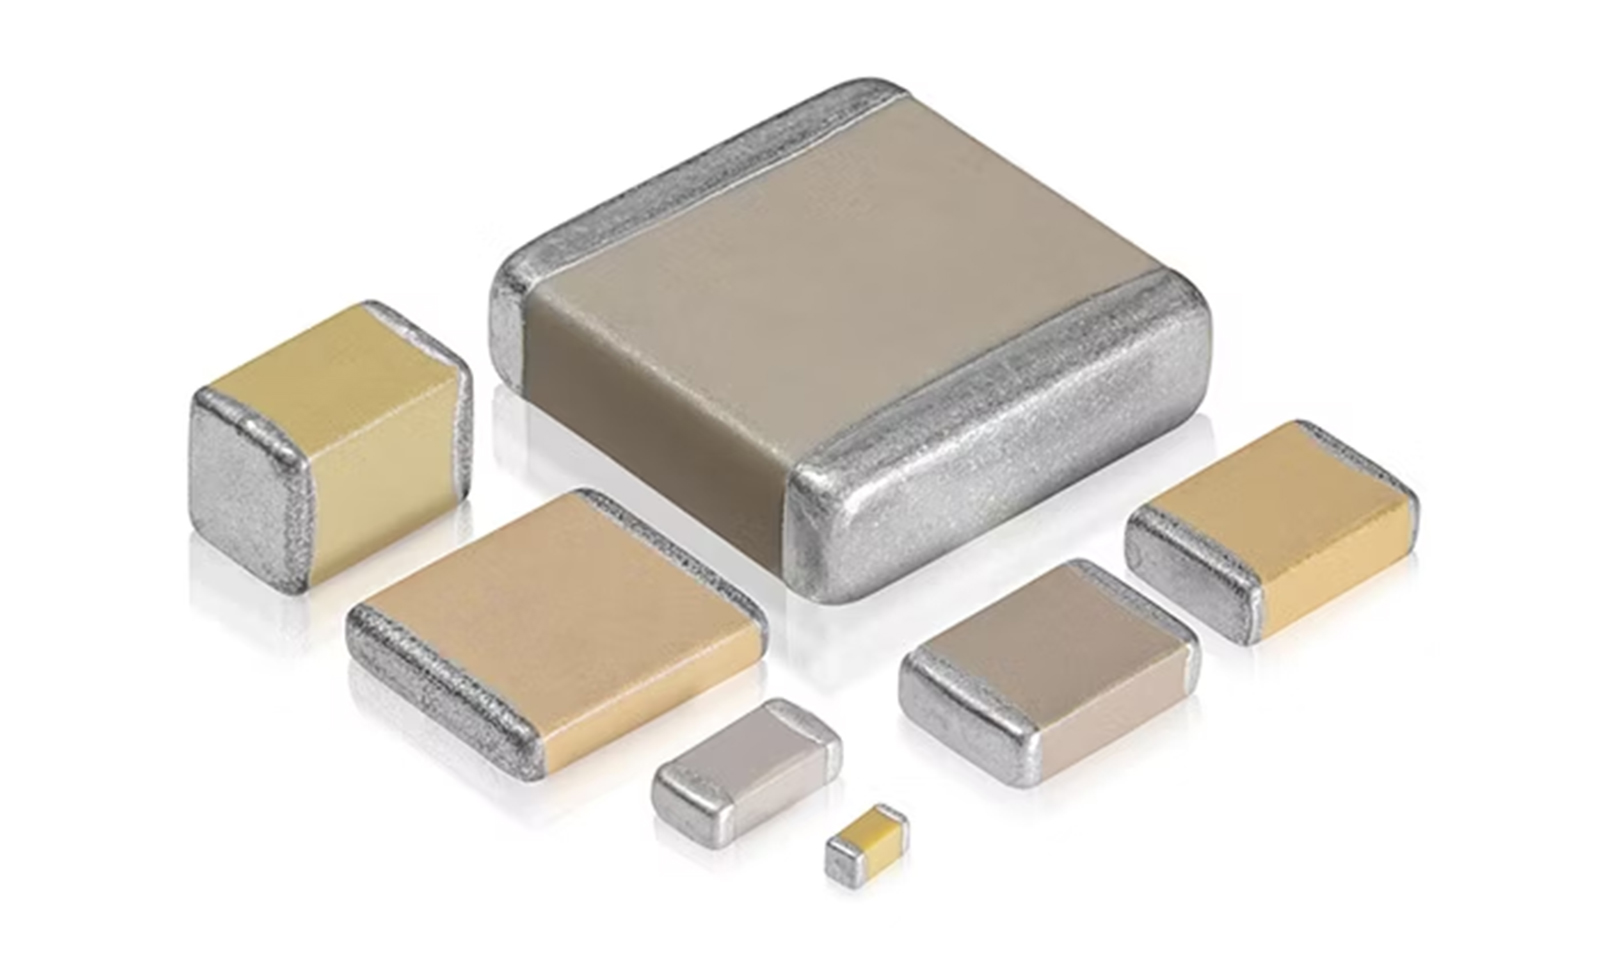 A ceramic capacitor is a fixed-value capacitor where the ceramic material acts as the dielectric. It is constructed of two or more alternating layers of ceramic and a metal layer acting as the electrodes. Ceramic capacitors, especially multilayer ceramic capacitors (MLCC)